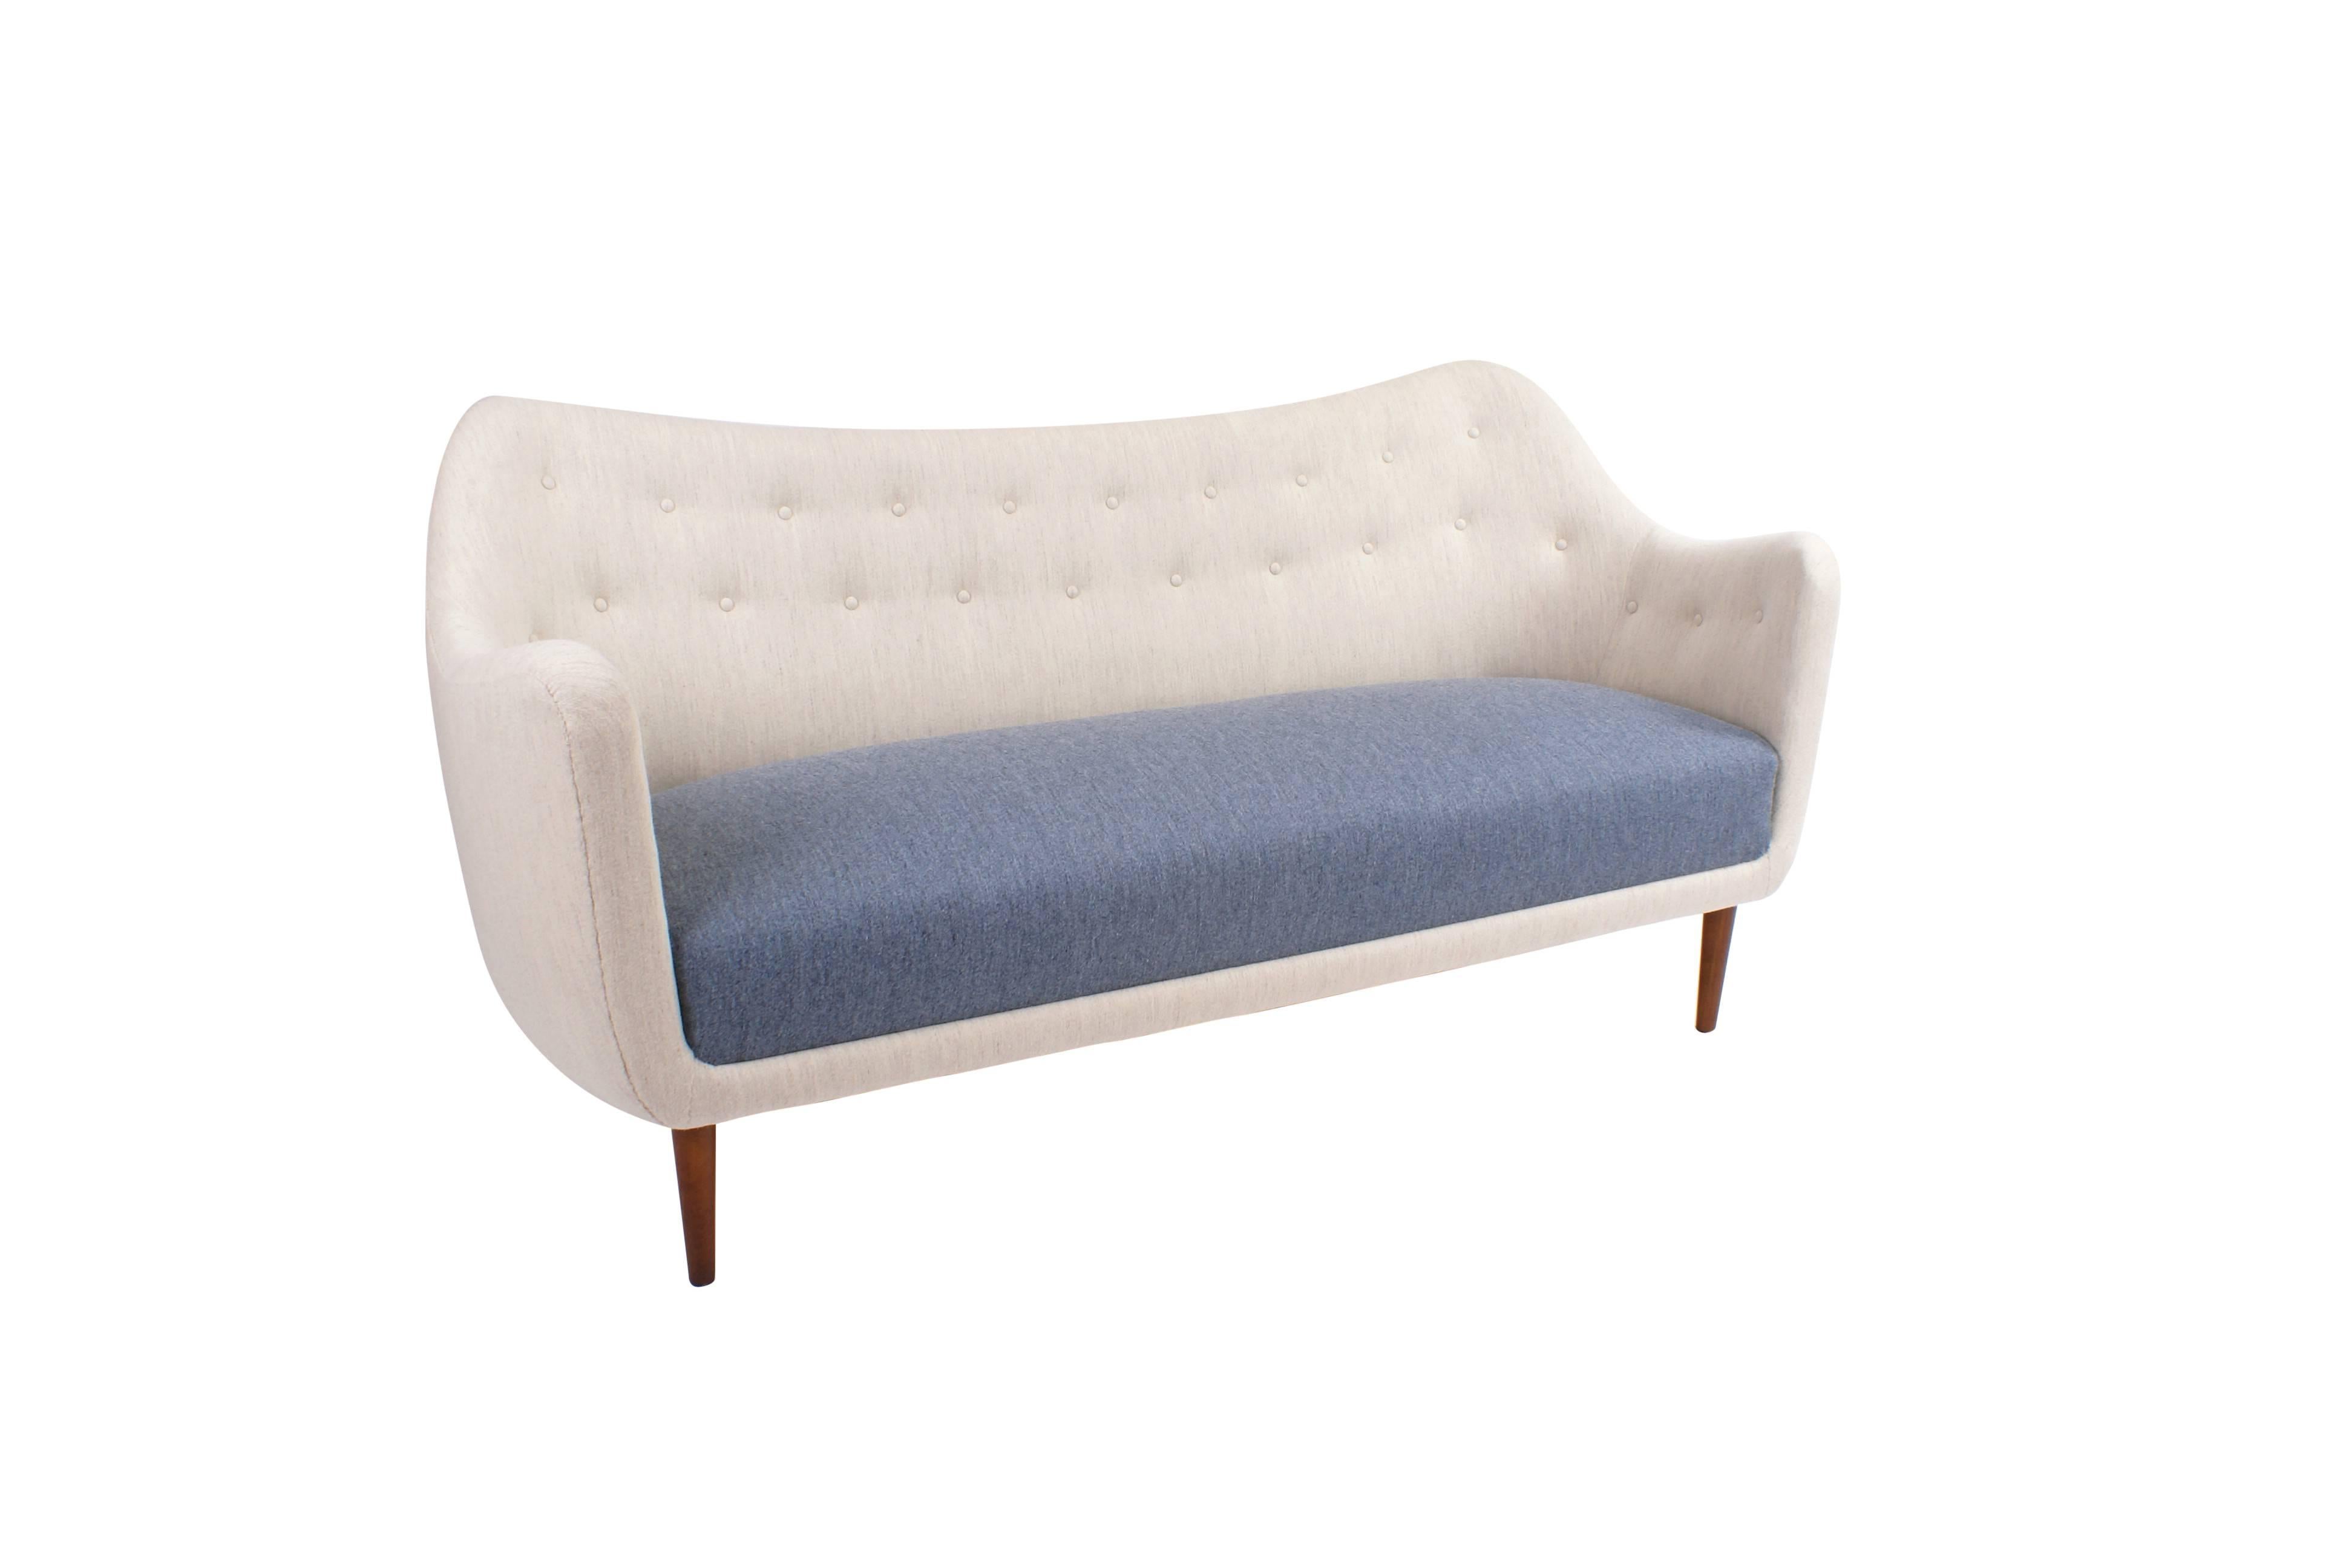 Freestanding 2.5 seater sofa with tapering, round legs. Sides and back newly upholstered in wool. Back fitted with buttons. Designed, 1946.

Literature: 